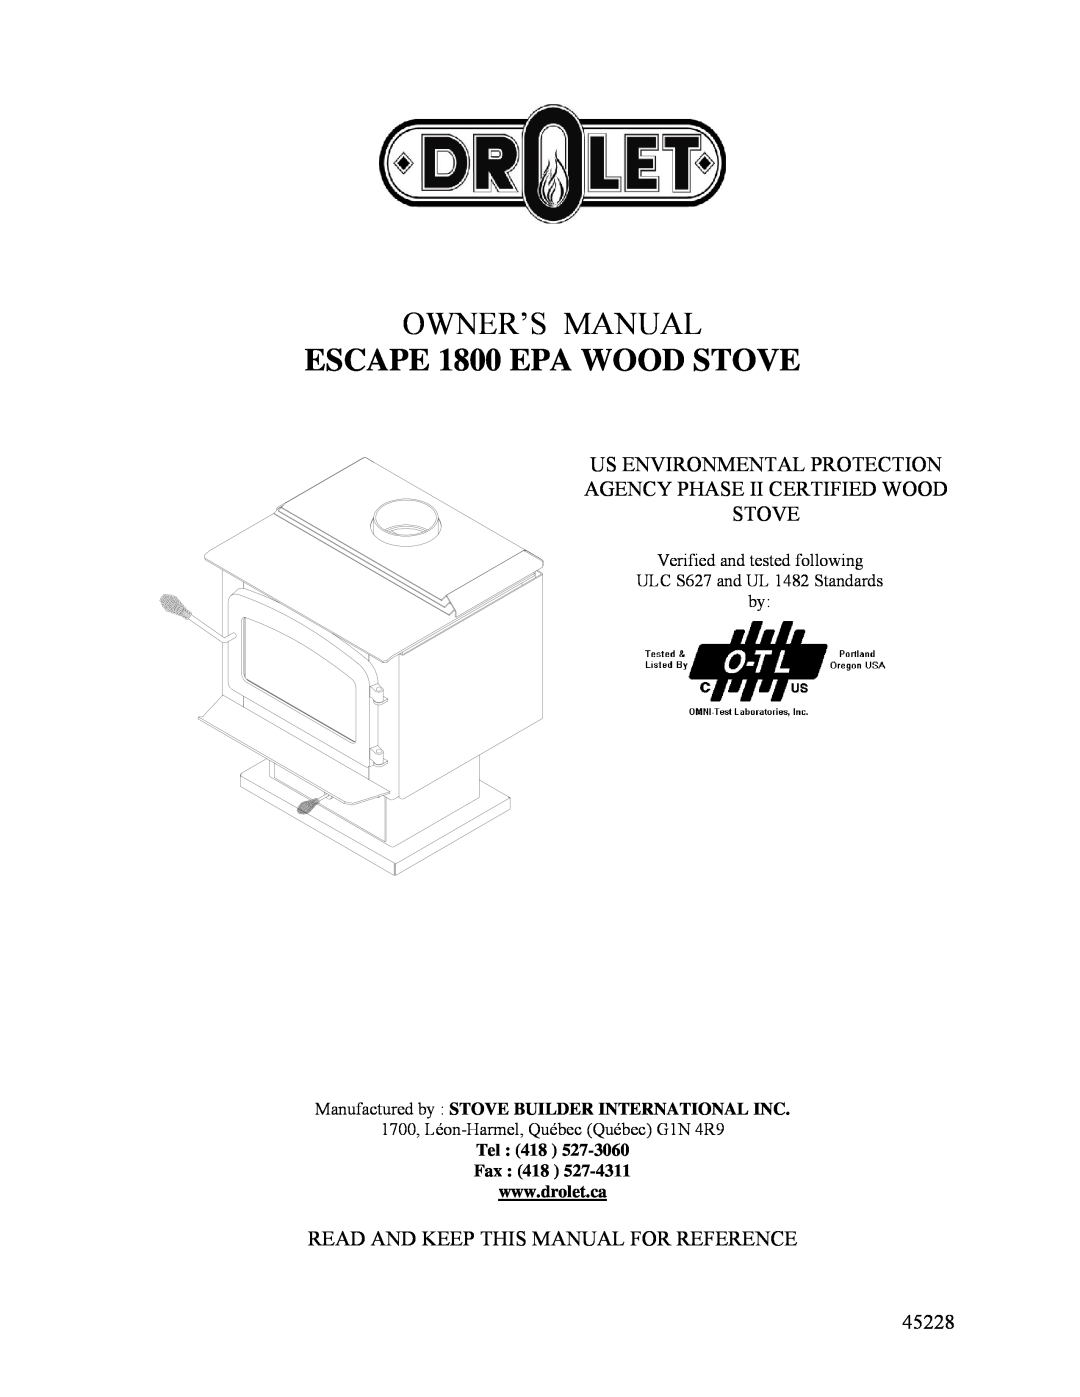 Drolet owner manual ESCAPE 1800 EPA WOOD STOVE, Owner’S Manual, Manufactured by STOVE BUILDER INTERNATIONAL INC 